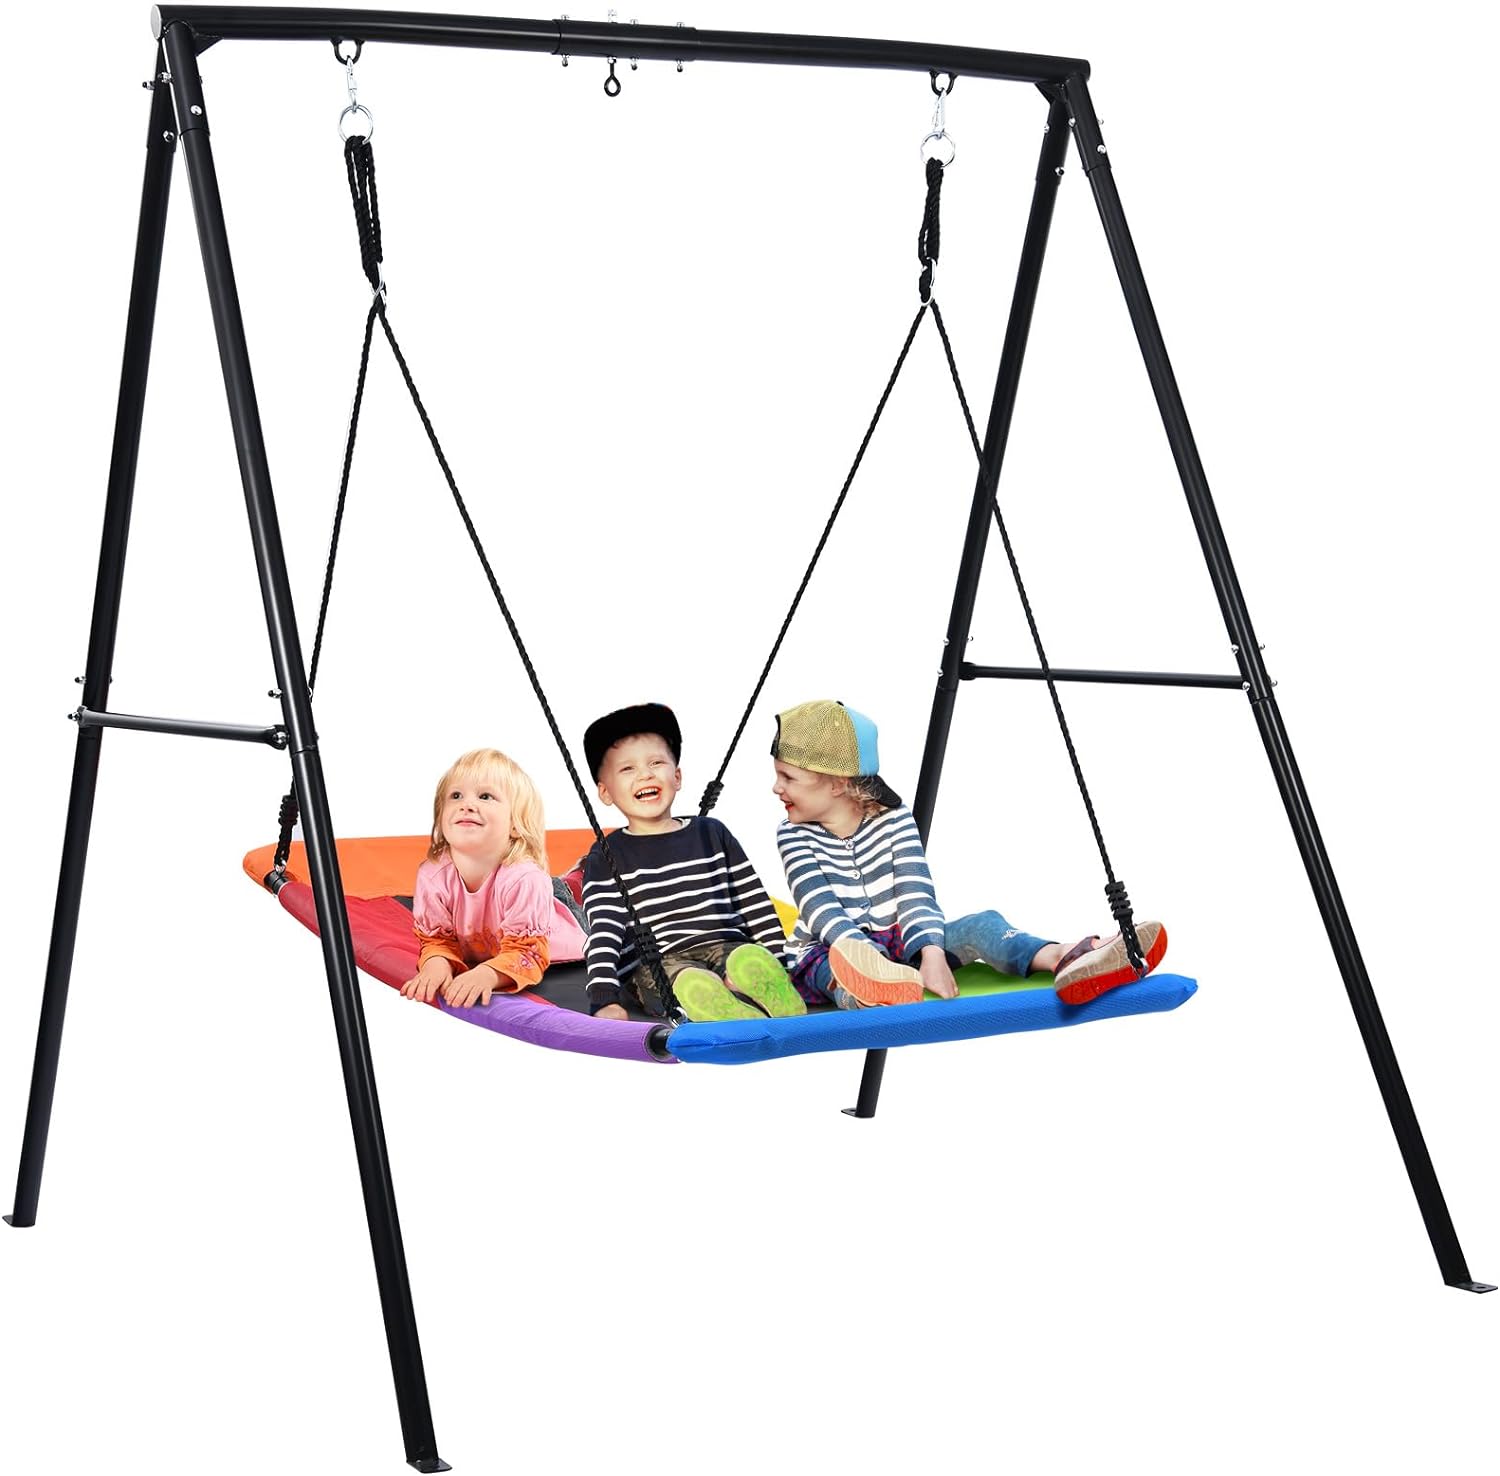 Trekassy 440lbs Heavy Duty A-Frame Metal Swing Stand with 60" Large Platform Swing